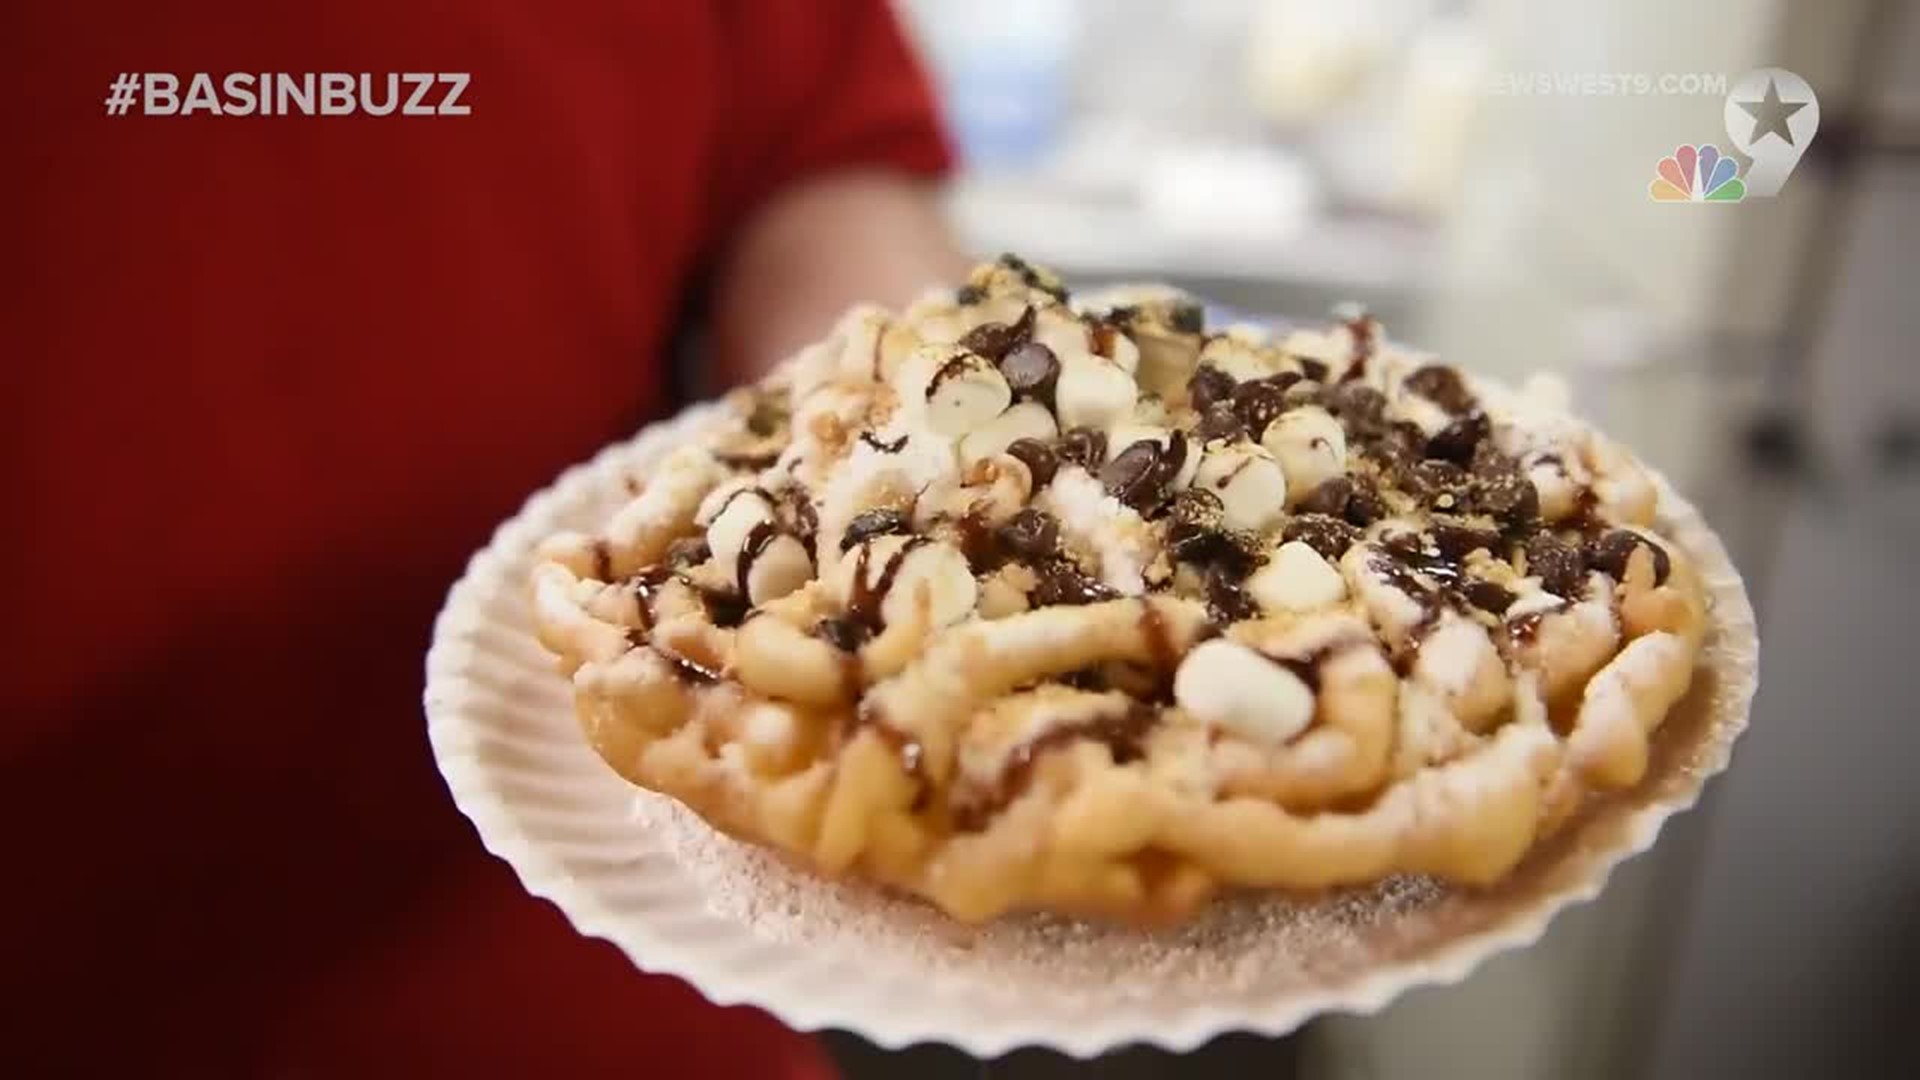 Celebrate National Funnel Cake Day with free funnel cakes